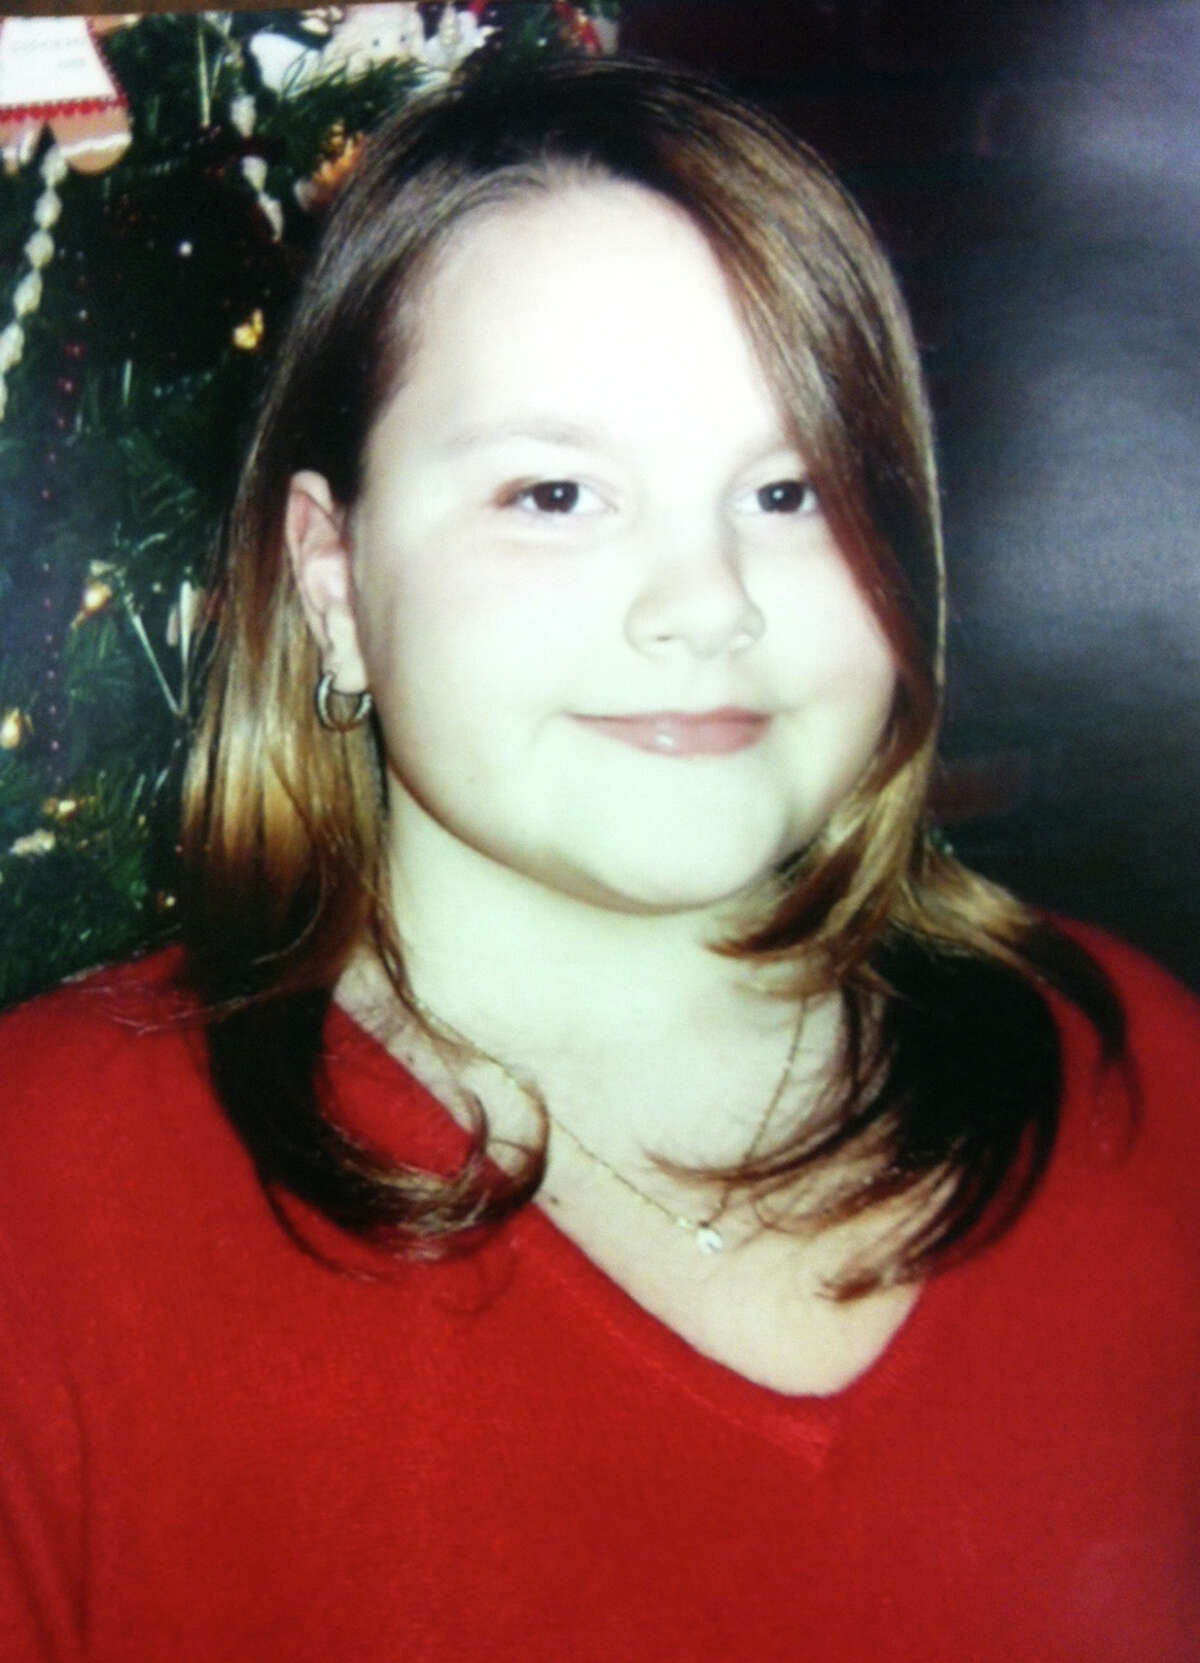 9-year-old Kylie Flannery, who was shot and killed along with her mother, Holly Flannery, 39, and Thomas Gaudet, 38, on Seaview Ave. in Bridgeport on Sept. 7, 2006. Richard Roszkowski was found guilty of the three murders.